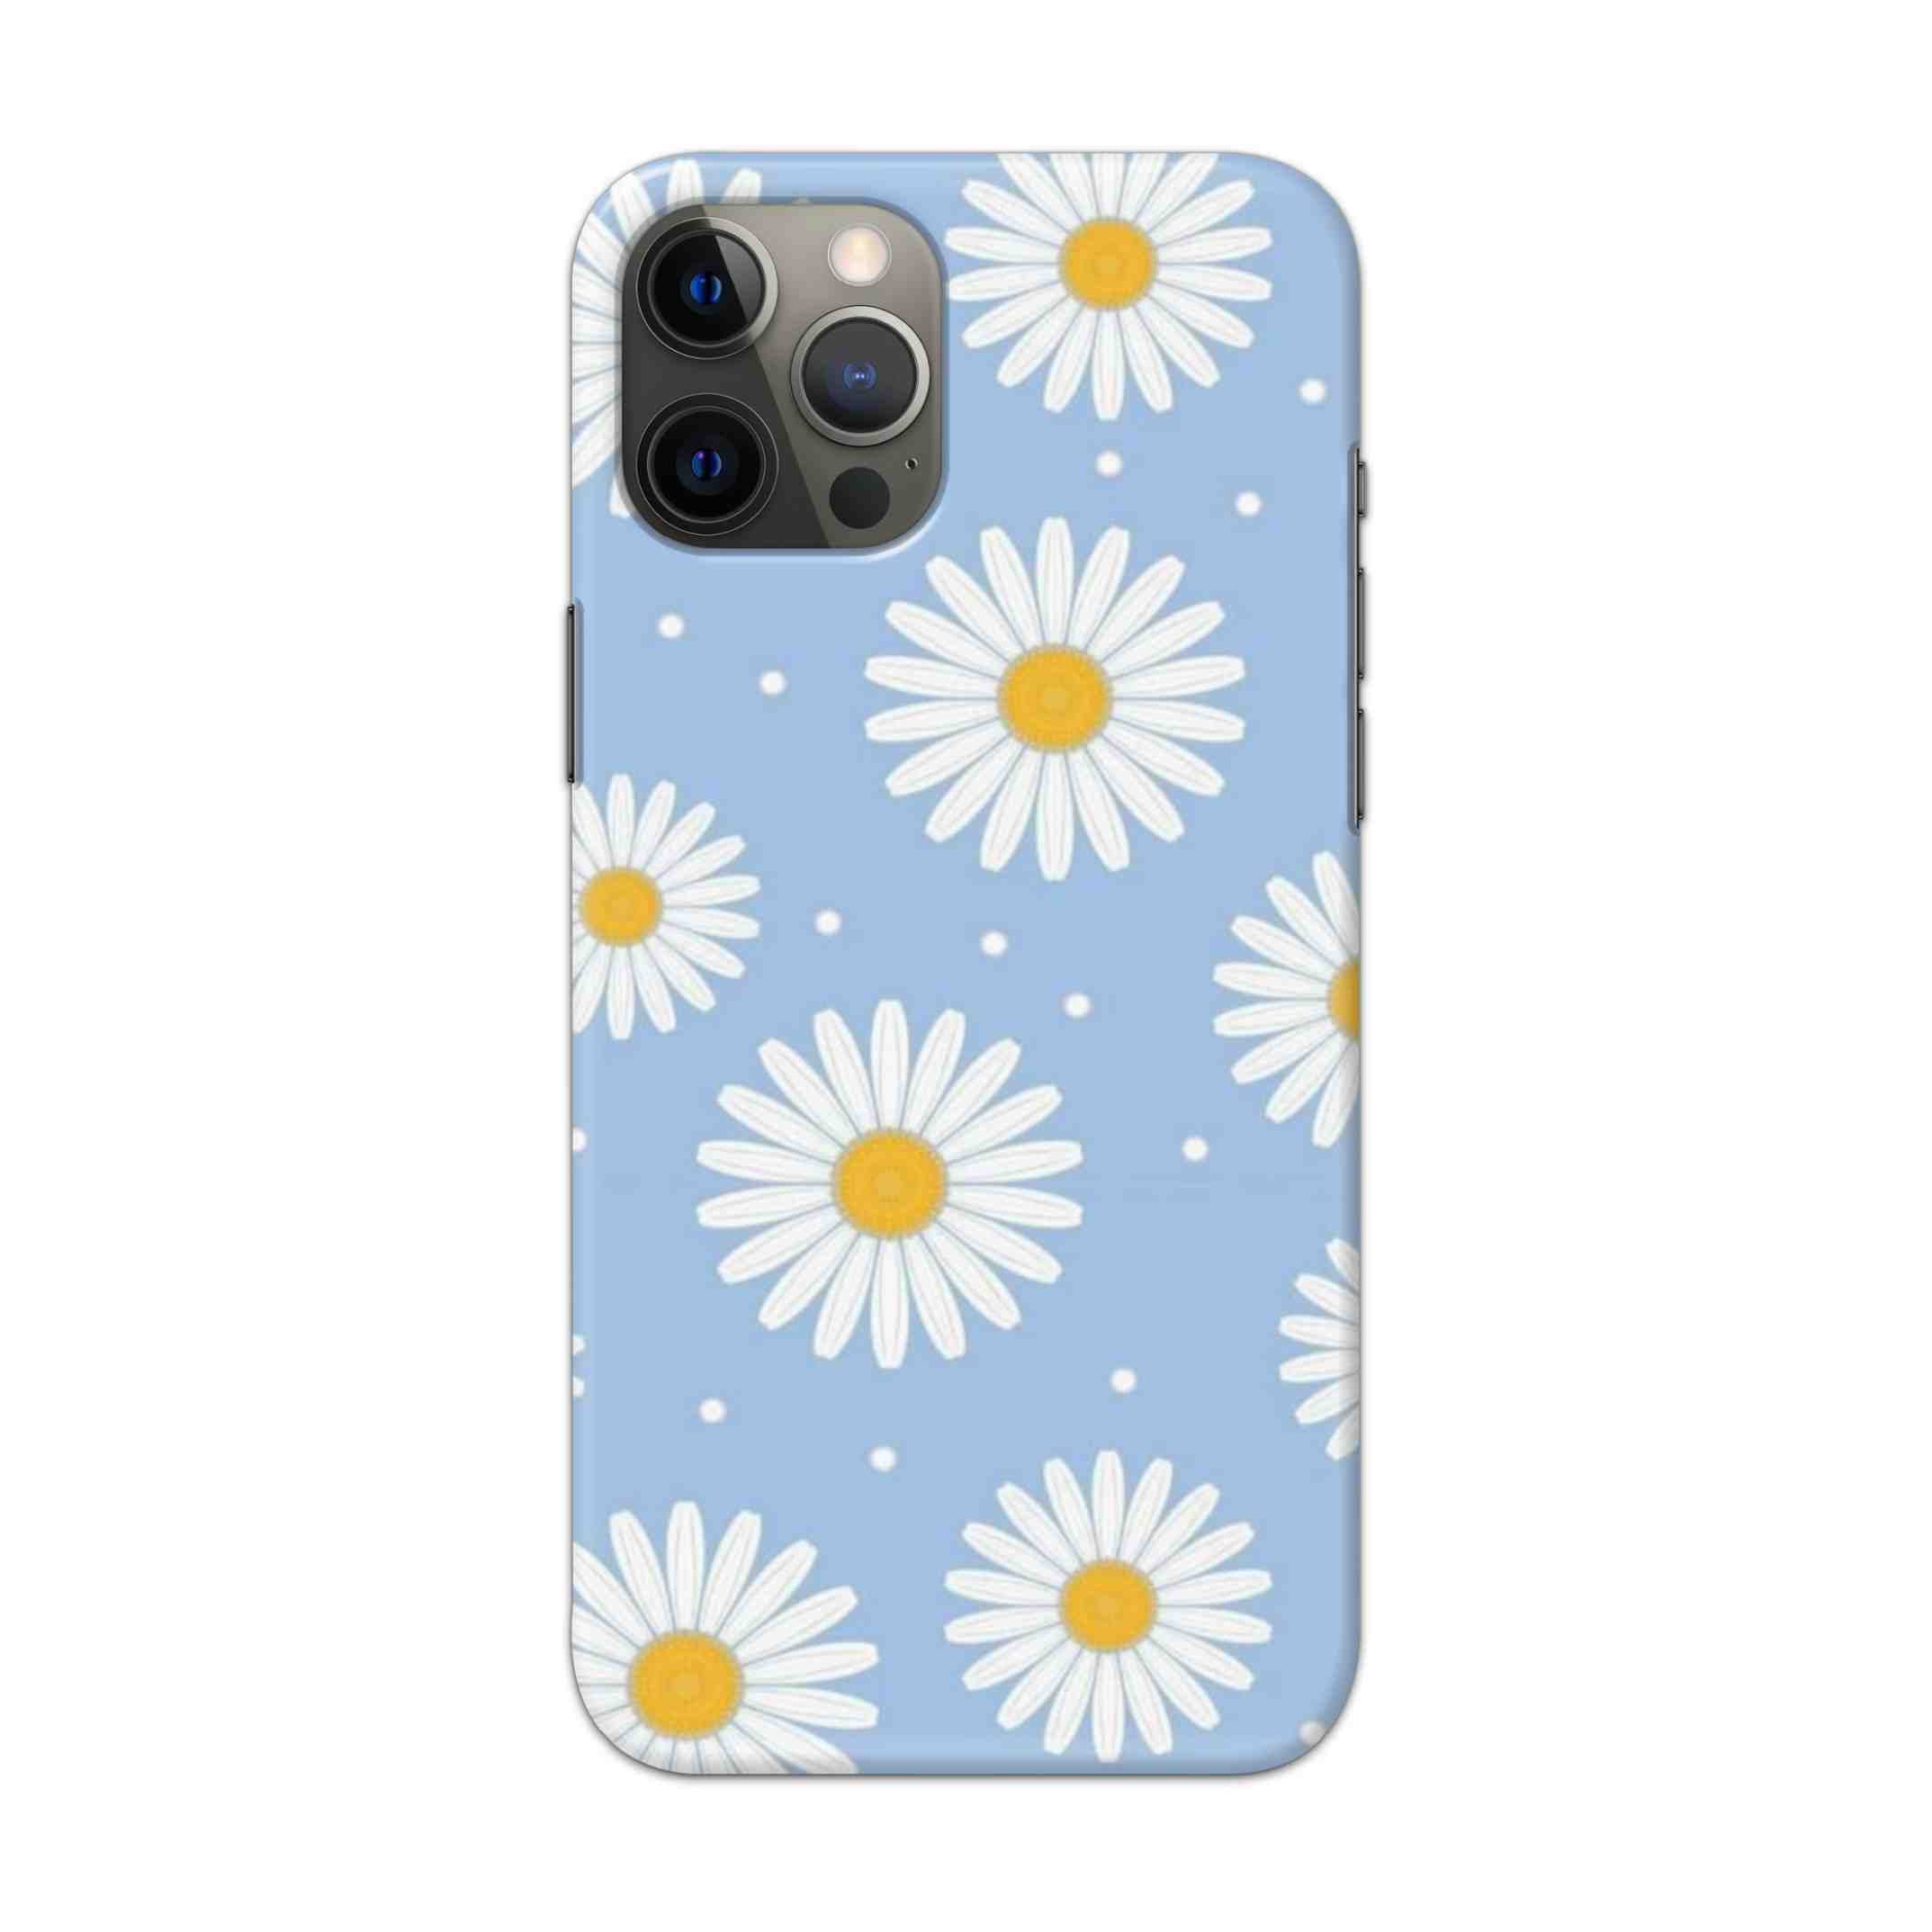 Buy White Sunflower Hard Back Mobile Phone Case Cover For Apple iPhone 12 pro max Online